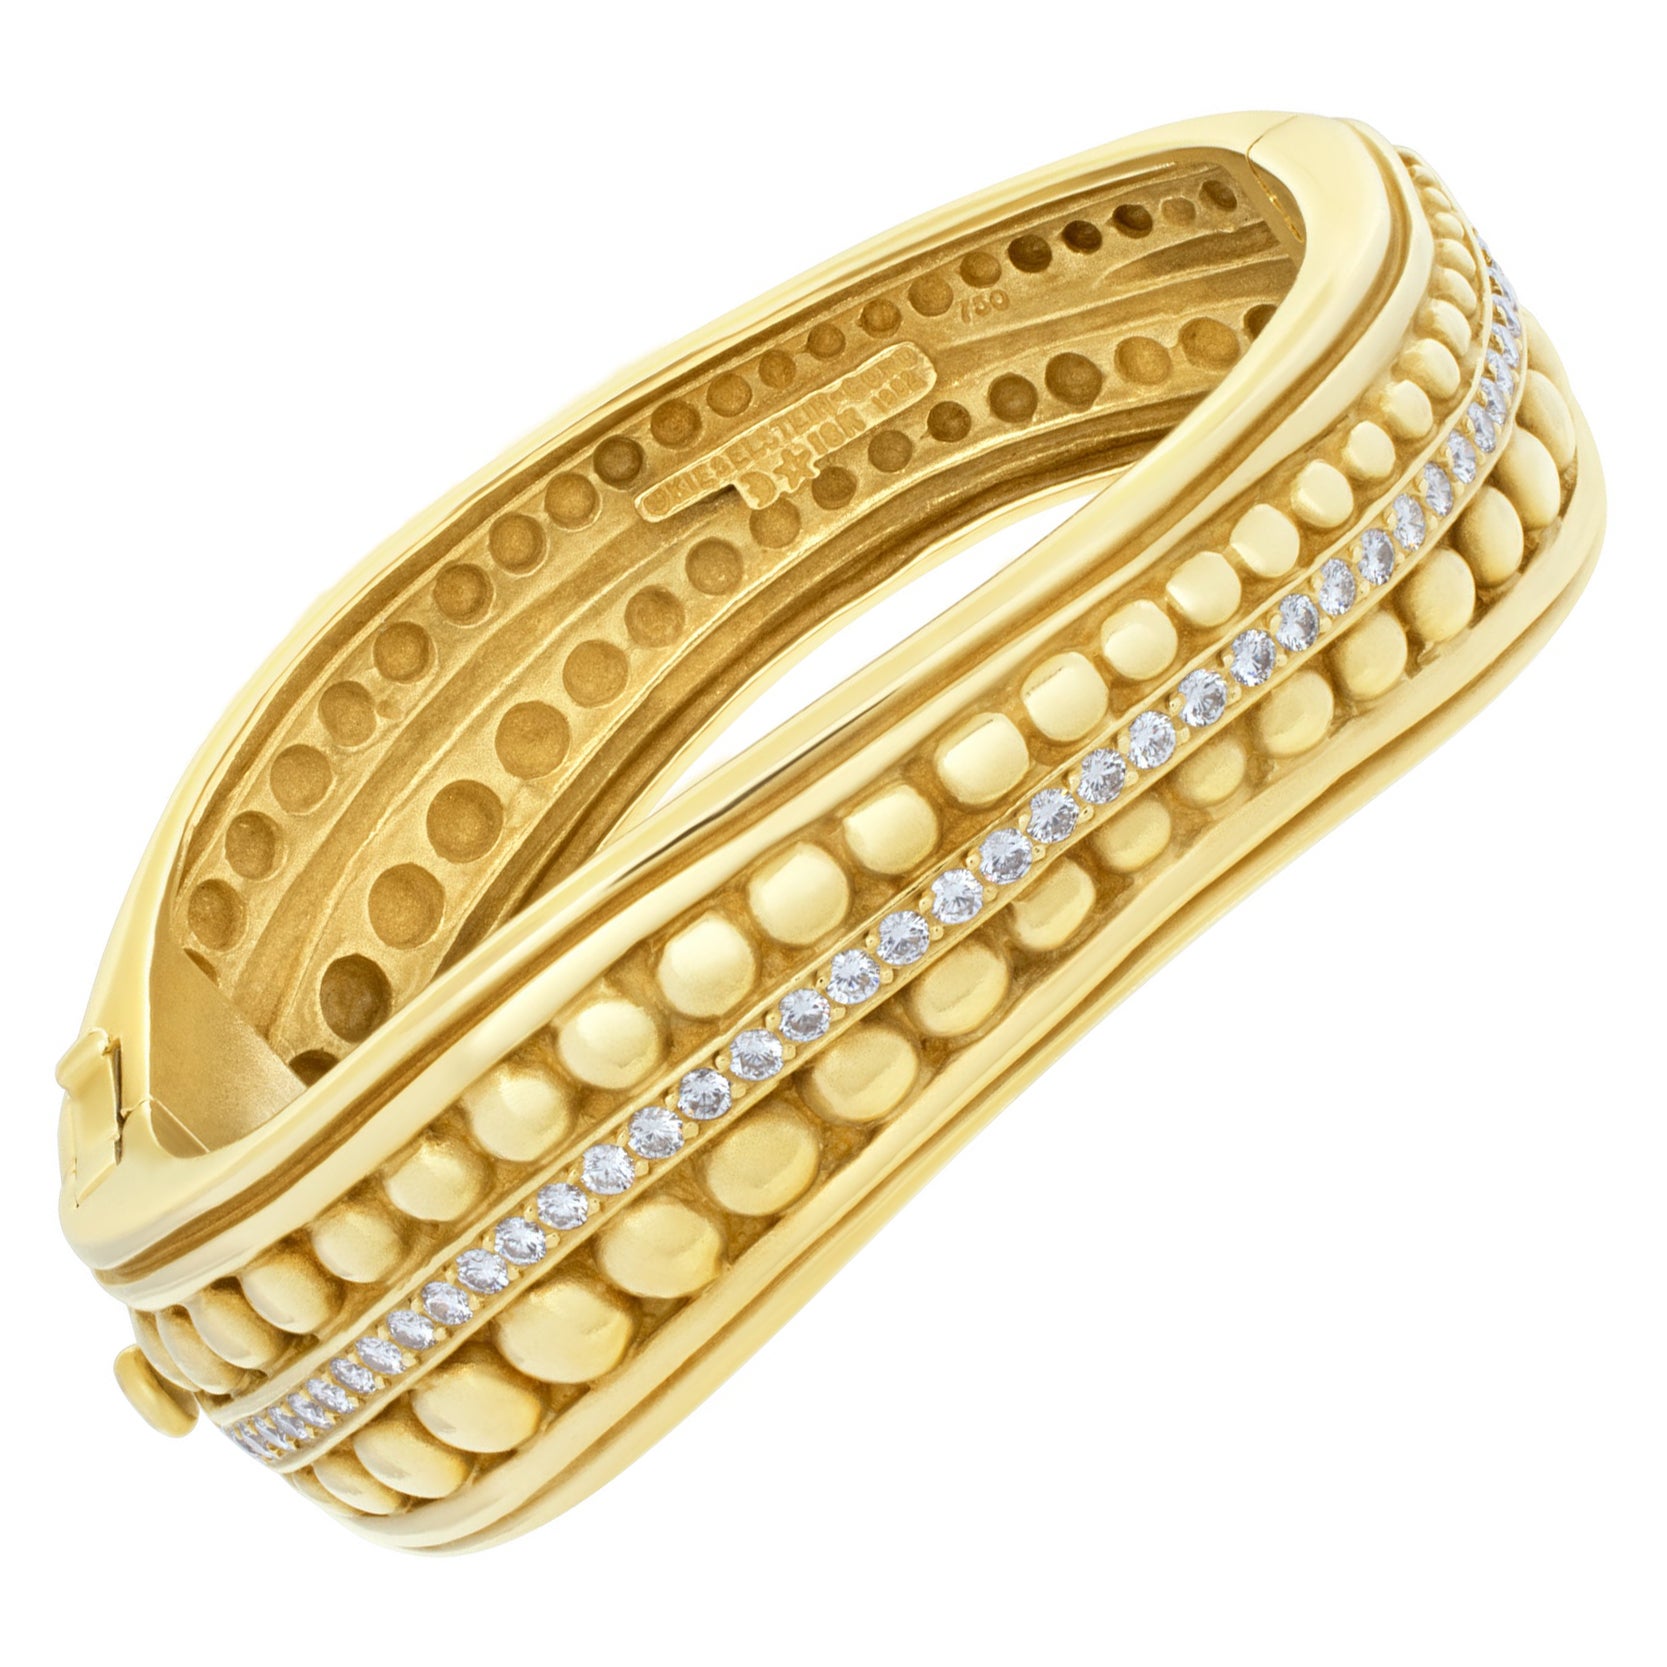 Kieselstein Cord Caviar Bangle in 18k with over 2 Carats in Diamonds